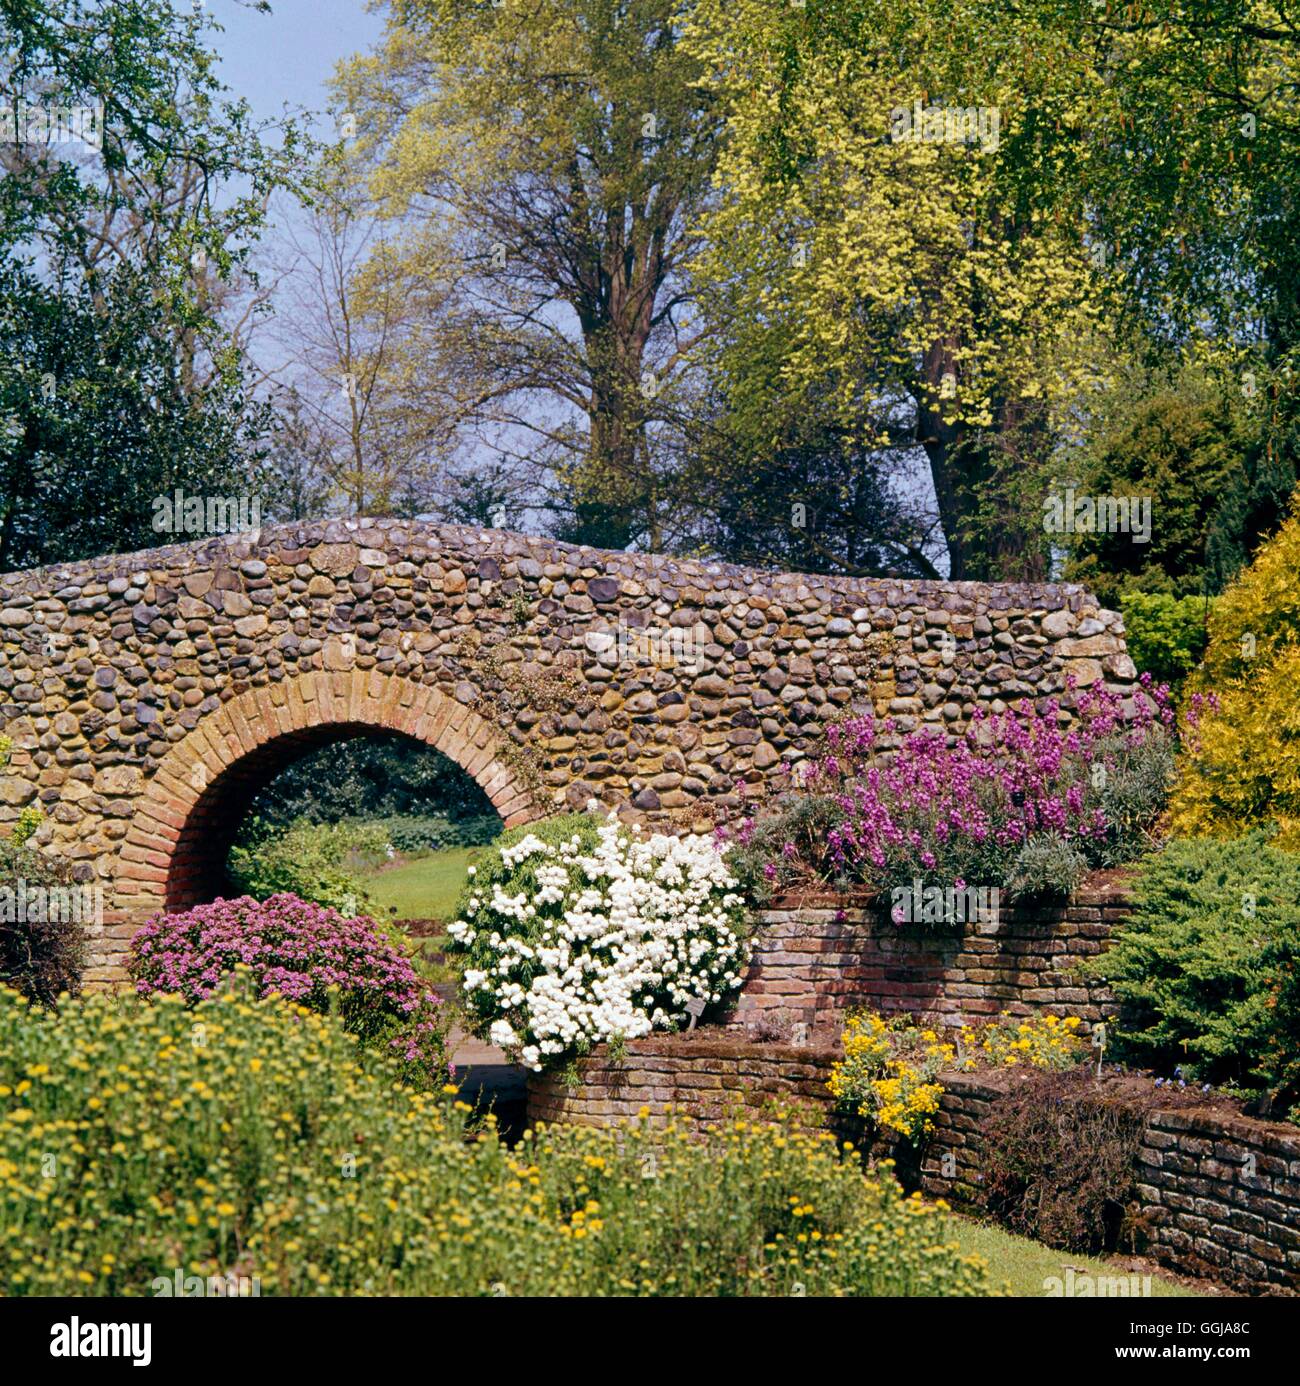 Bressingham - The Dell - Garden of the late Alan Bloom   GDN017818  /Photosho Stock Photo